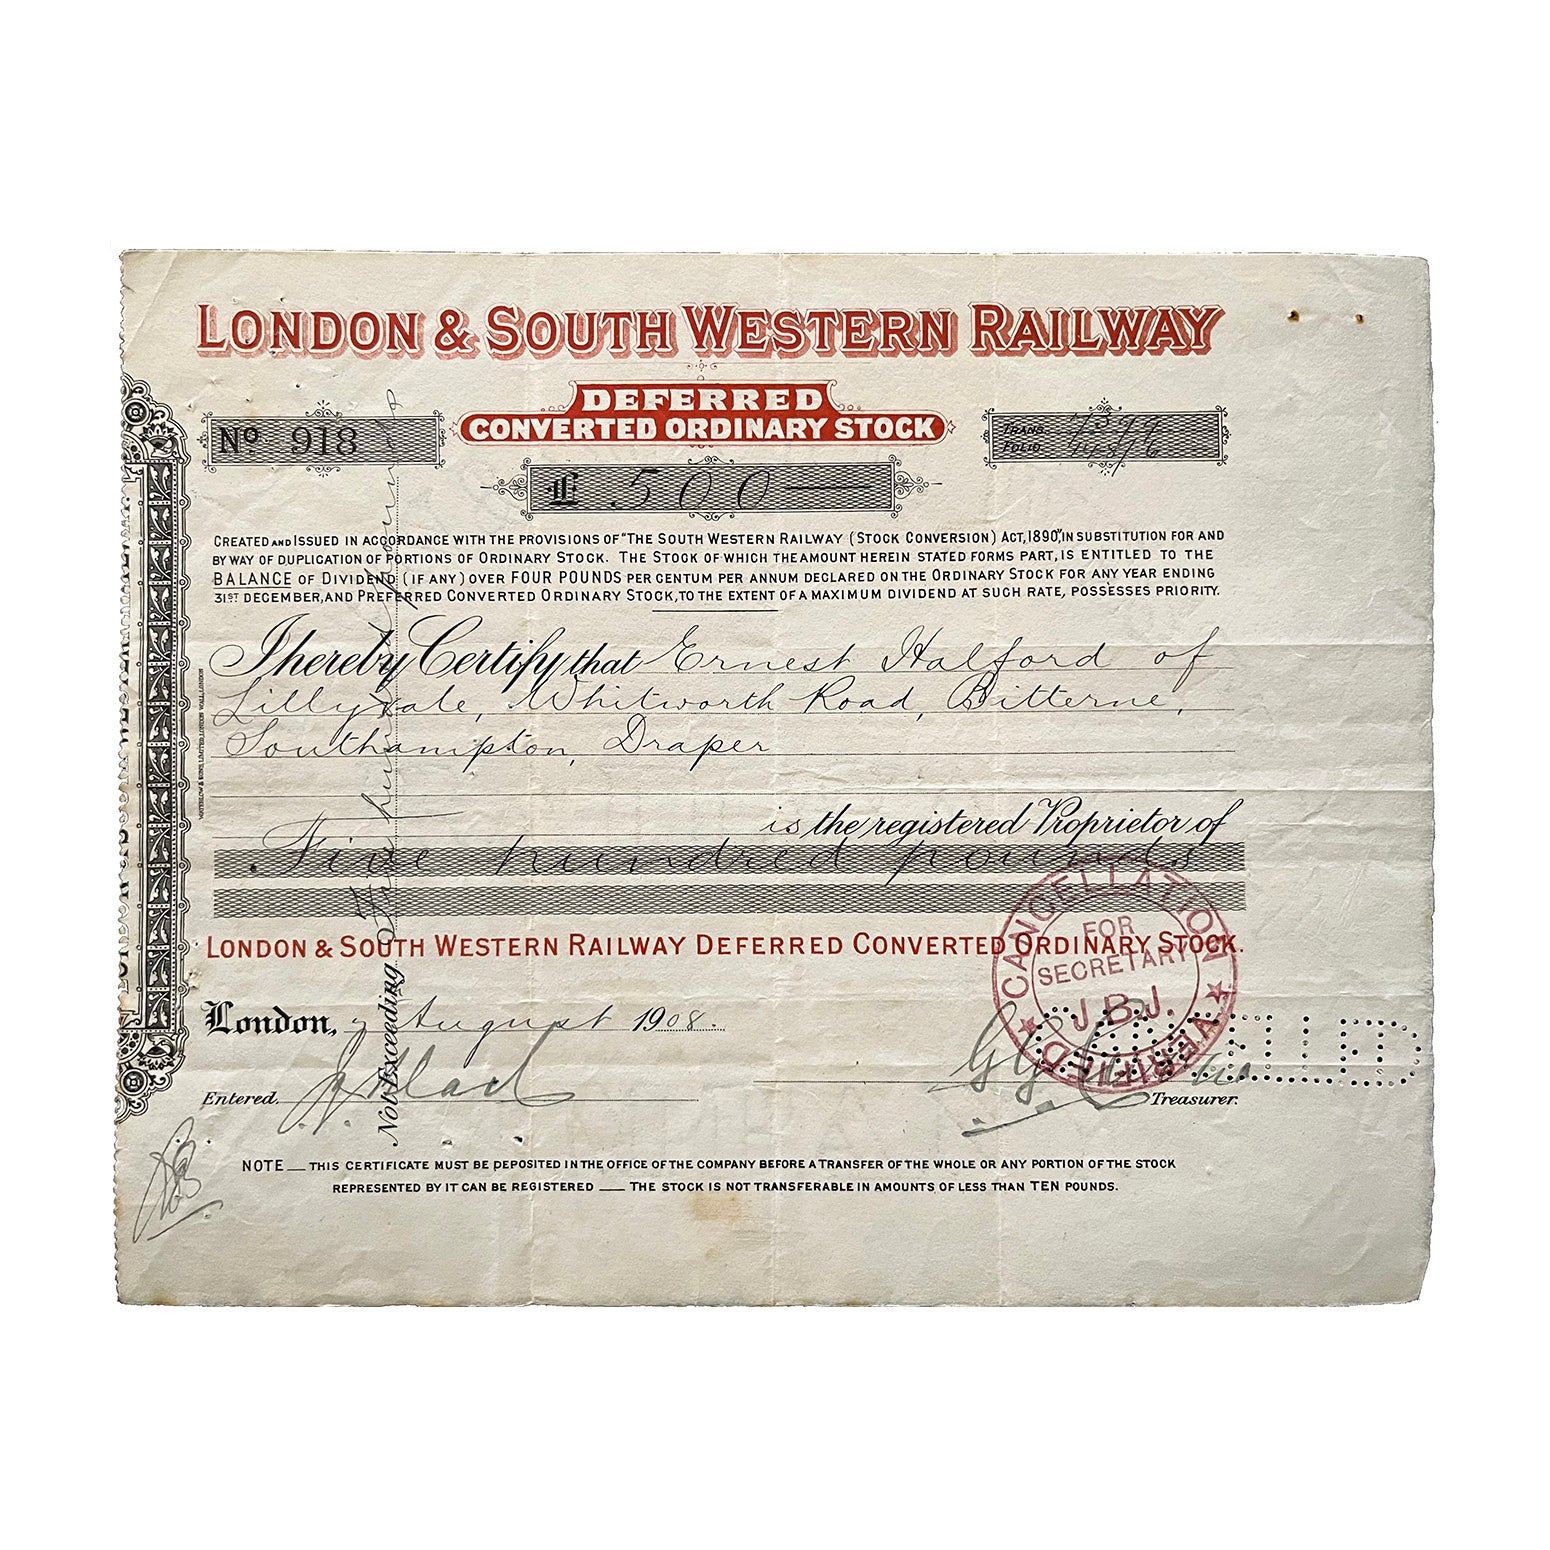 railway share certificate, London & South Western Railway Company, Deferred Converted Ordinary Stock, issued 1908